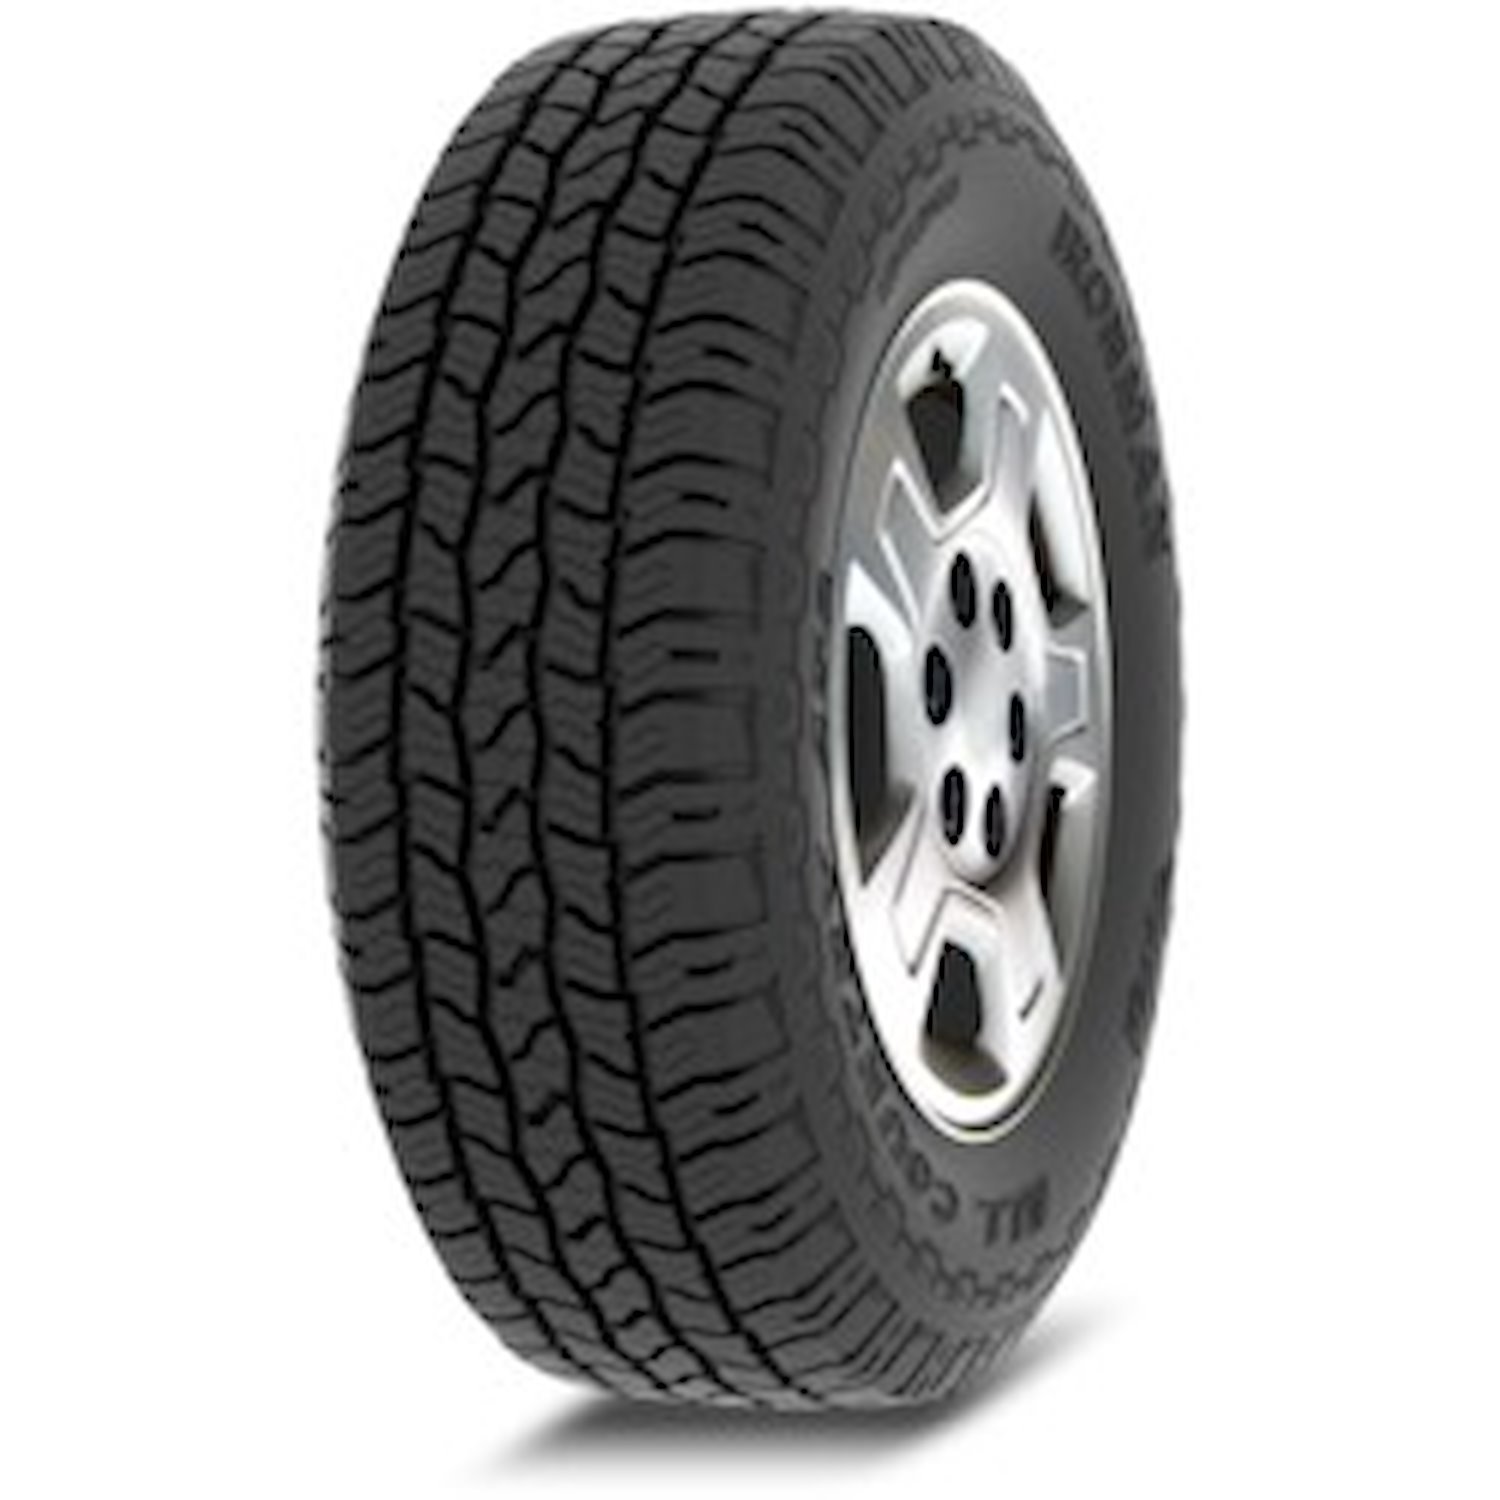 07654 All Country AT2 Tire, LT265/75R16, 123/120R